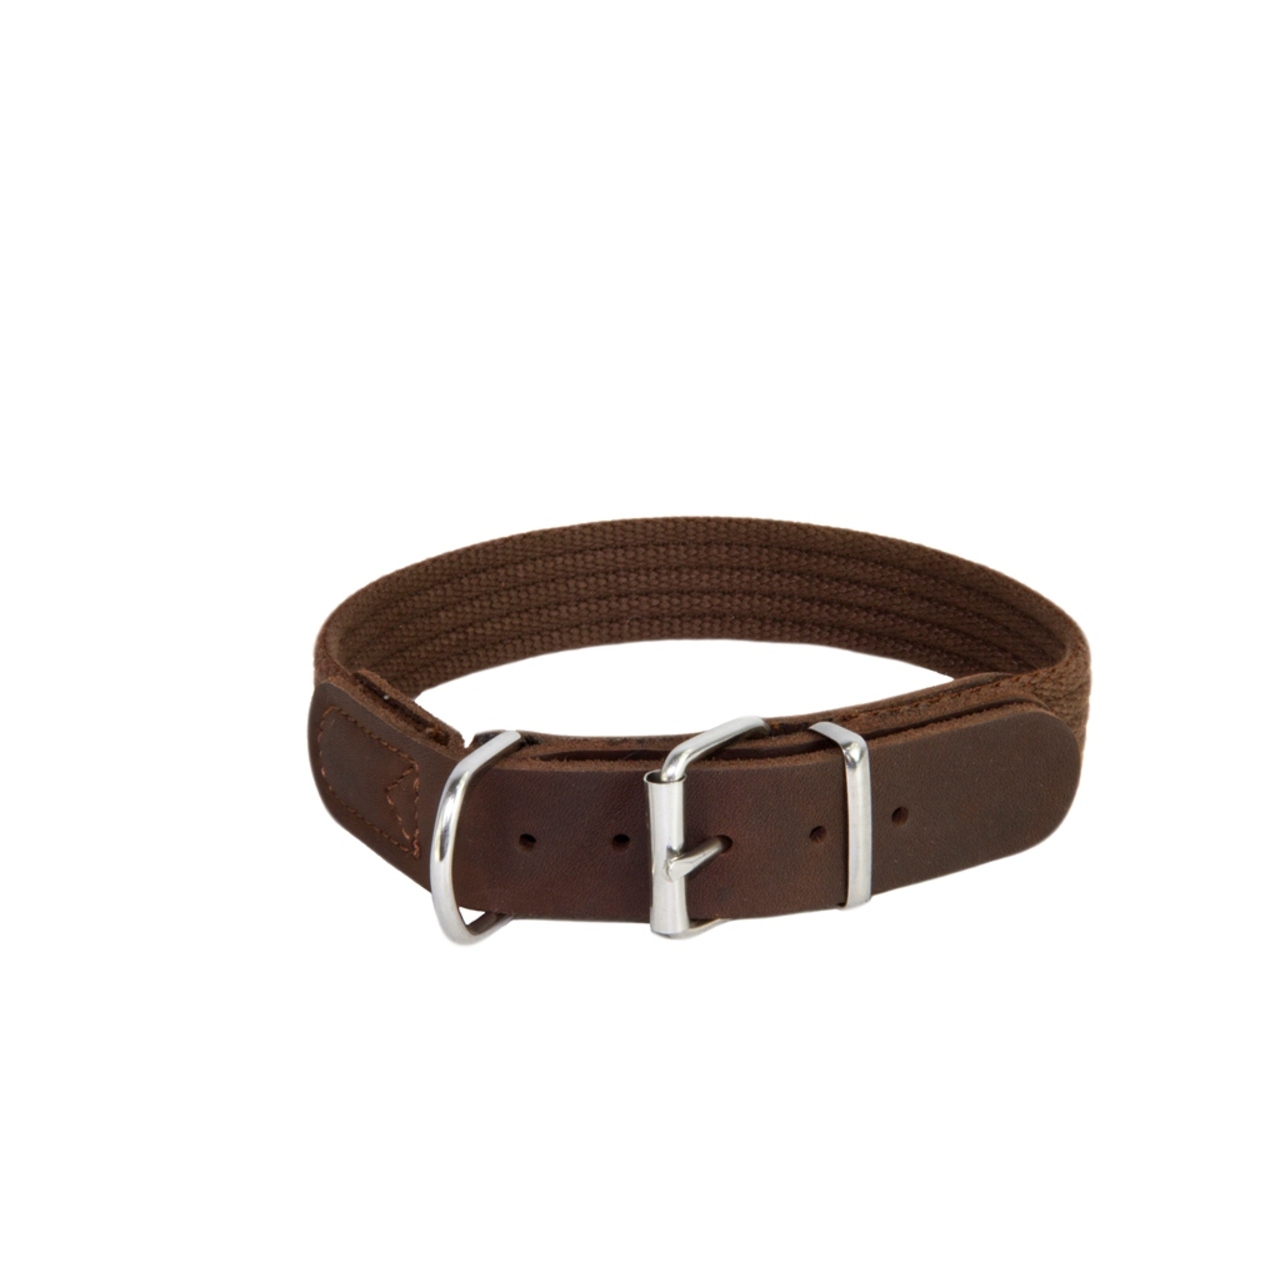 An image of Earthbound Cotton Brown Collar 36 - 42cm